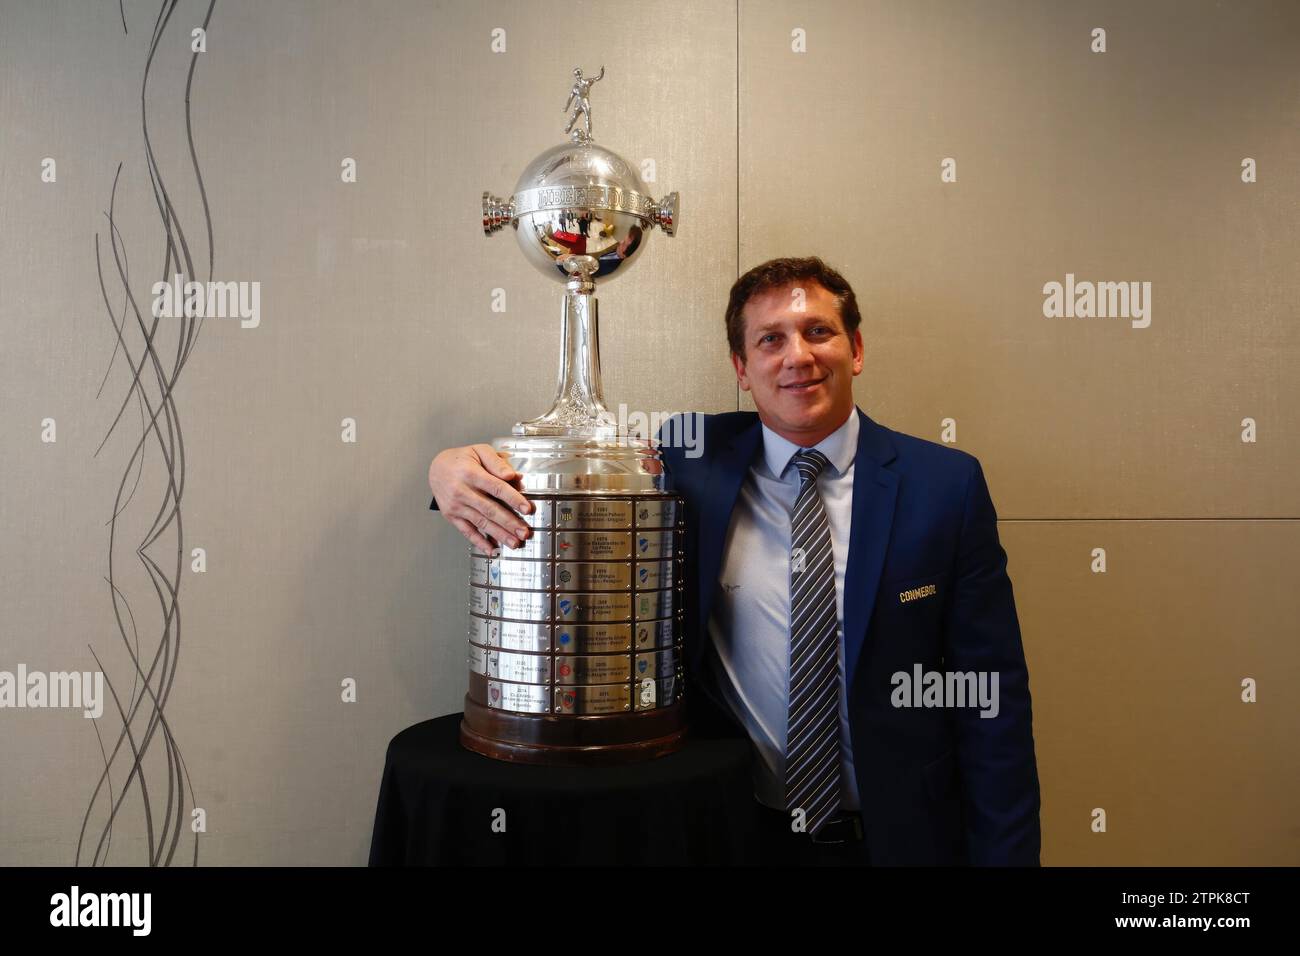 Madrid, 12/08/2018. Interview with Alejandro Domínguez president of CONMEBOL. In the image, with the Copa Libertadores trophy. Photo: Guillermo Navarro ARCHDC. Credit: Album / Archivo ABC / Guillermo Navarro Stock Photo